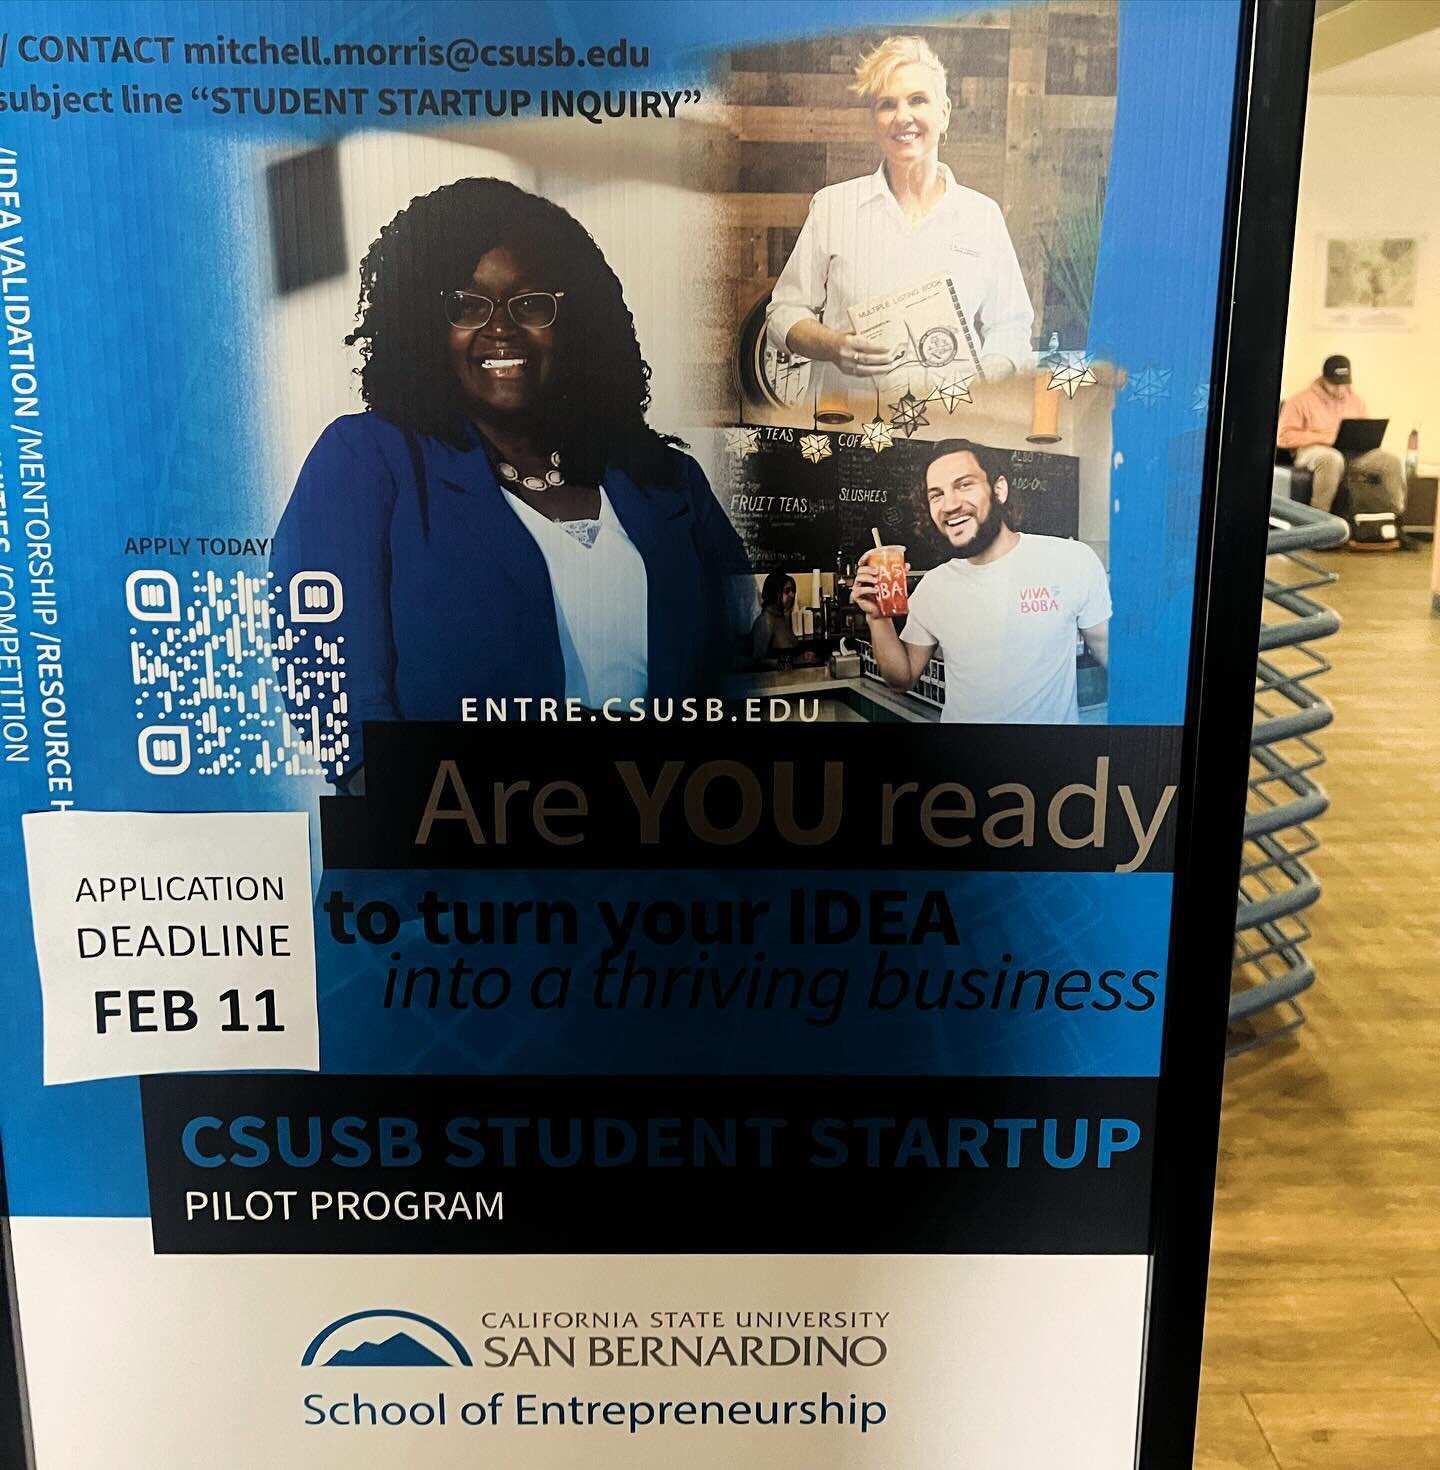 All my dreams are realized. I am officially a stock image for @csusb @csusb.smsu. Thank you for using me as an example of business success to other #CSUSB students. I hope I and @vivalaboba can be the encouragement someone needs to become an entrepre